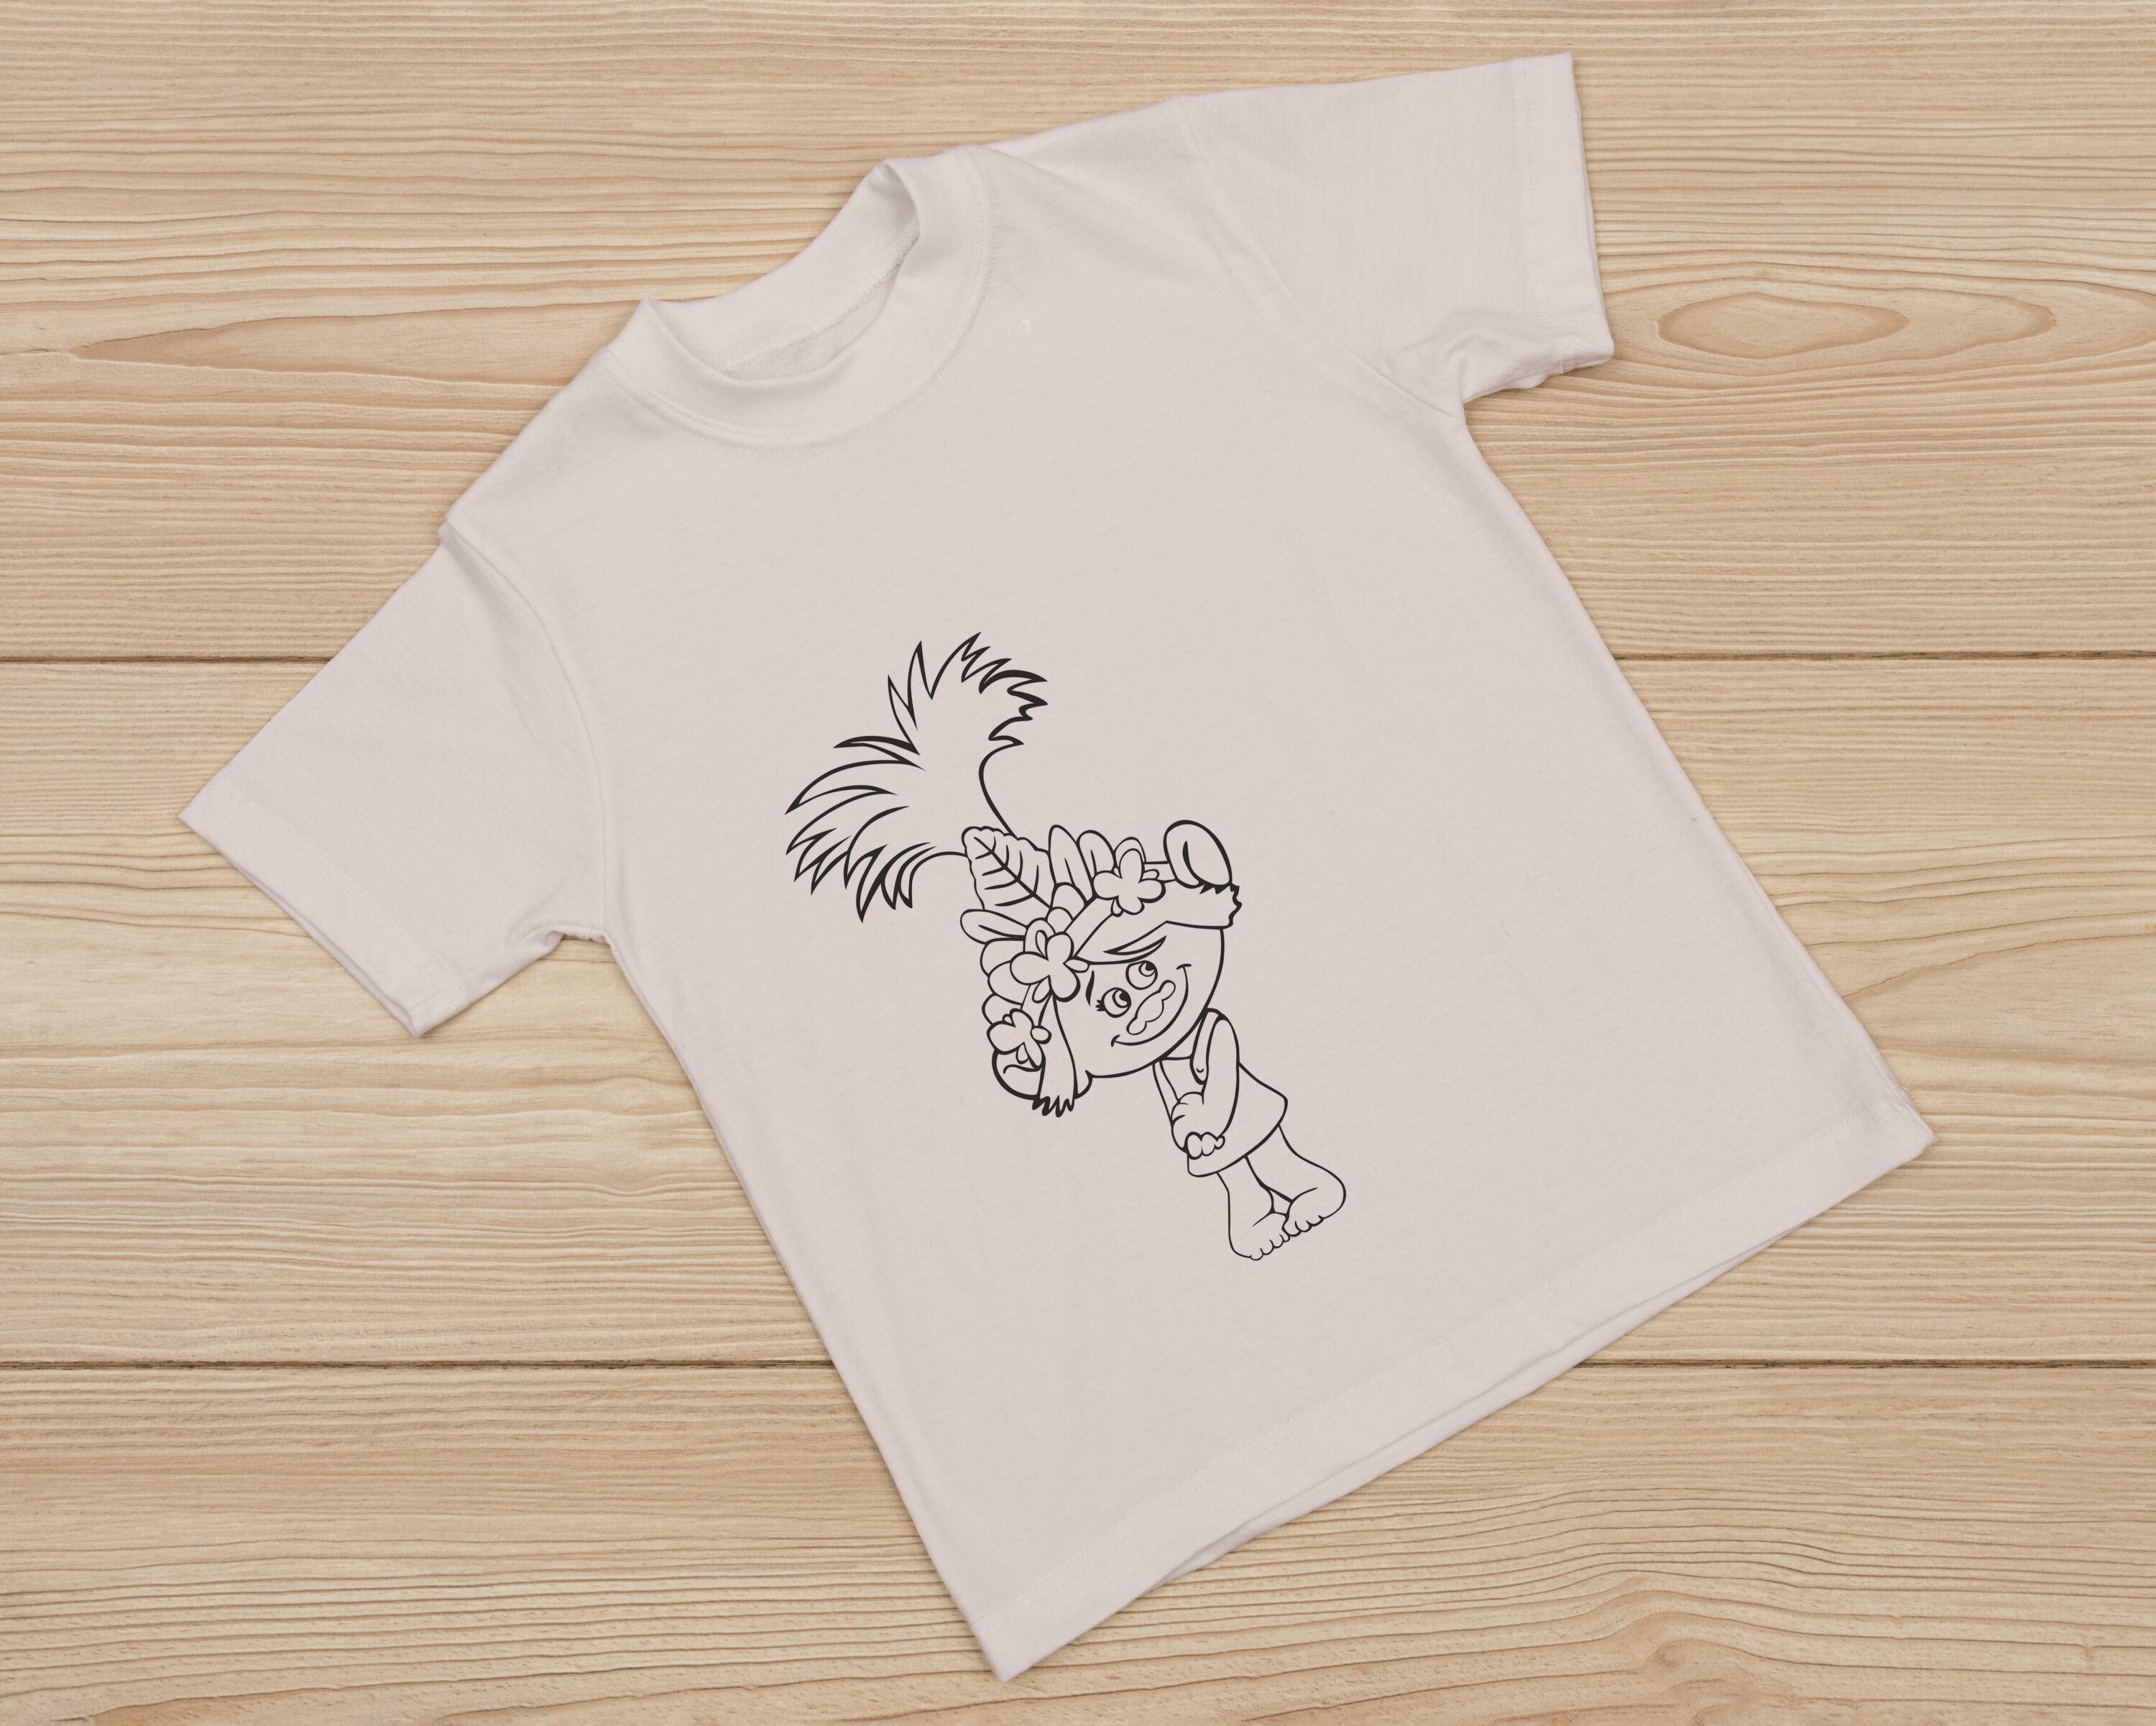 White T-shirt with a black outline of a cartoon character - Poppy.